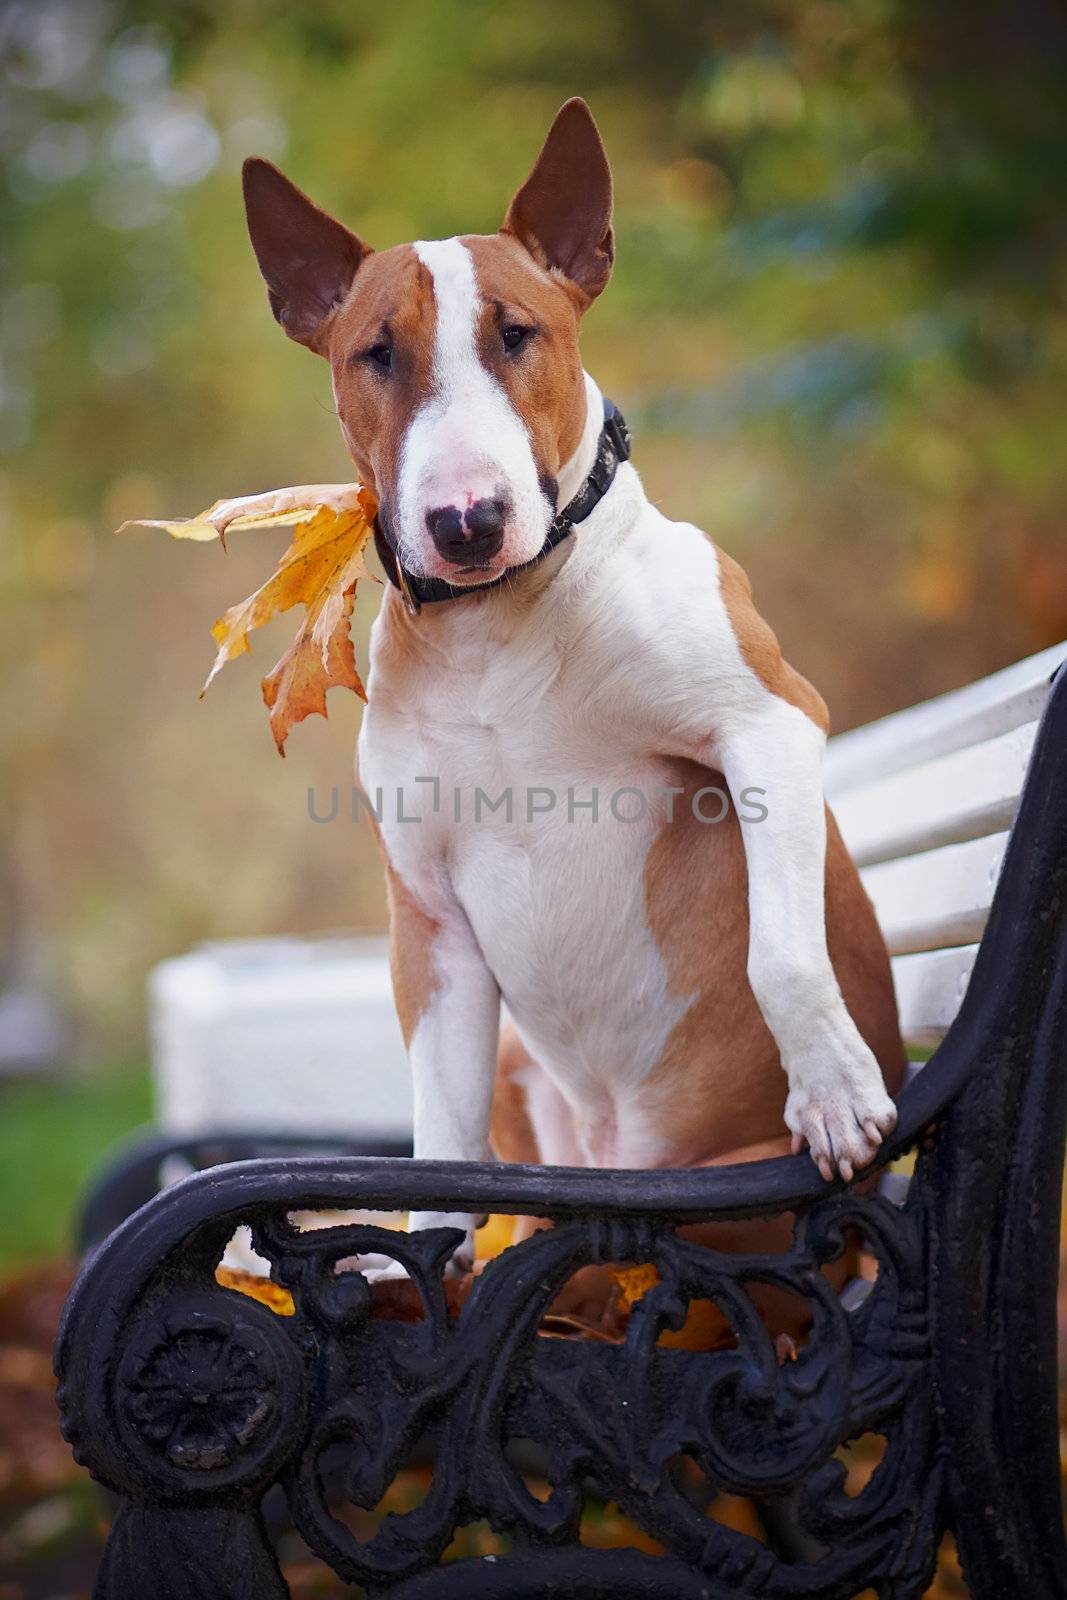 The red bull terrier sits on a bench in the autumn afternoon